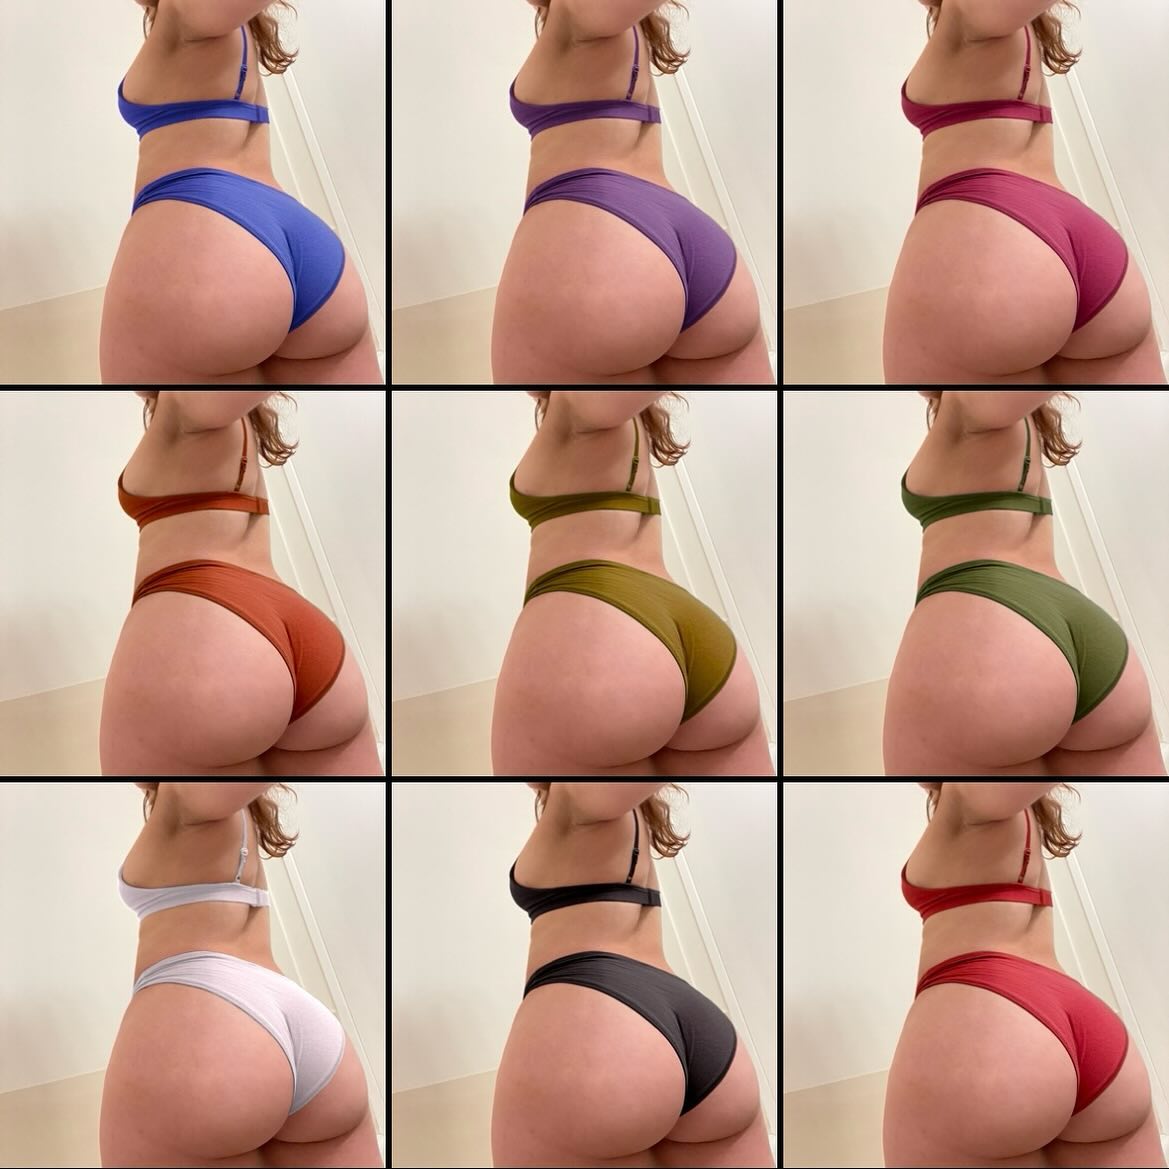 Which one’s your favorite?? 🌈